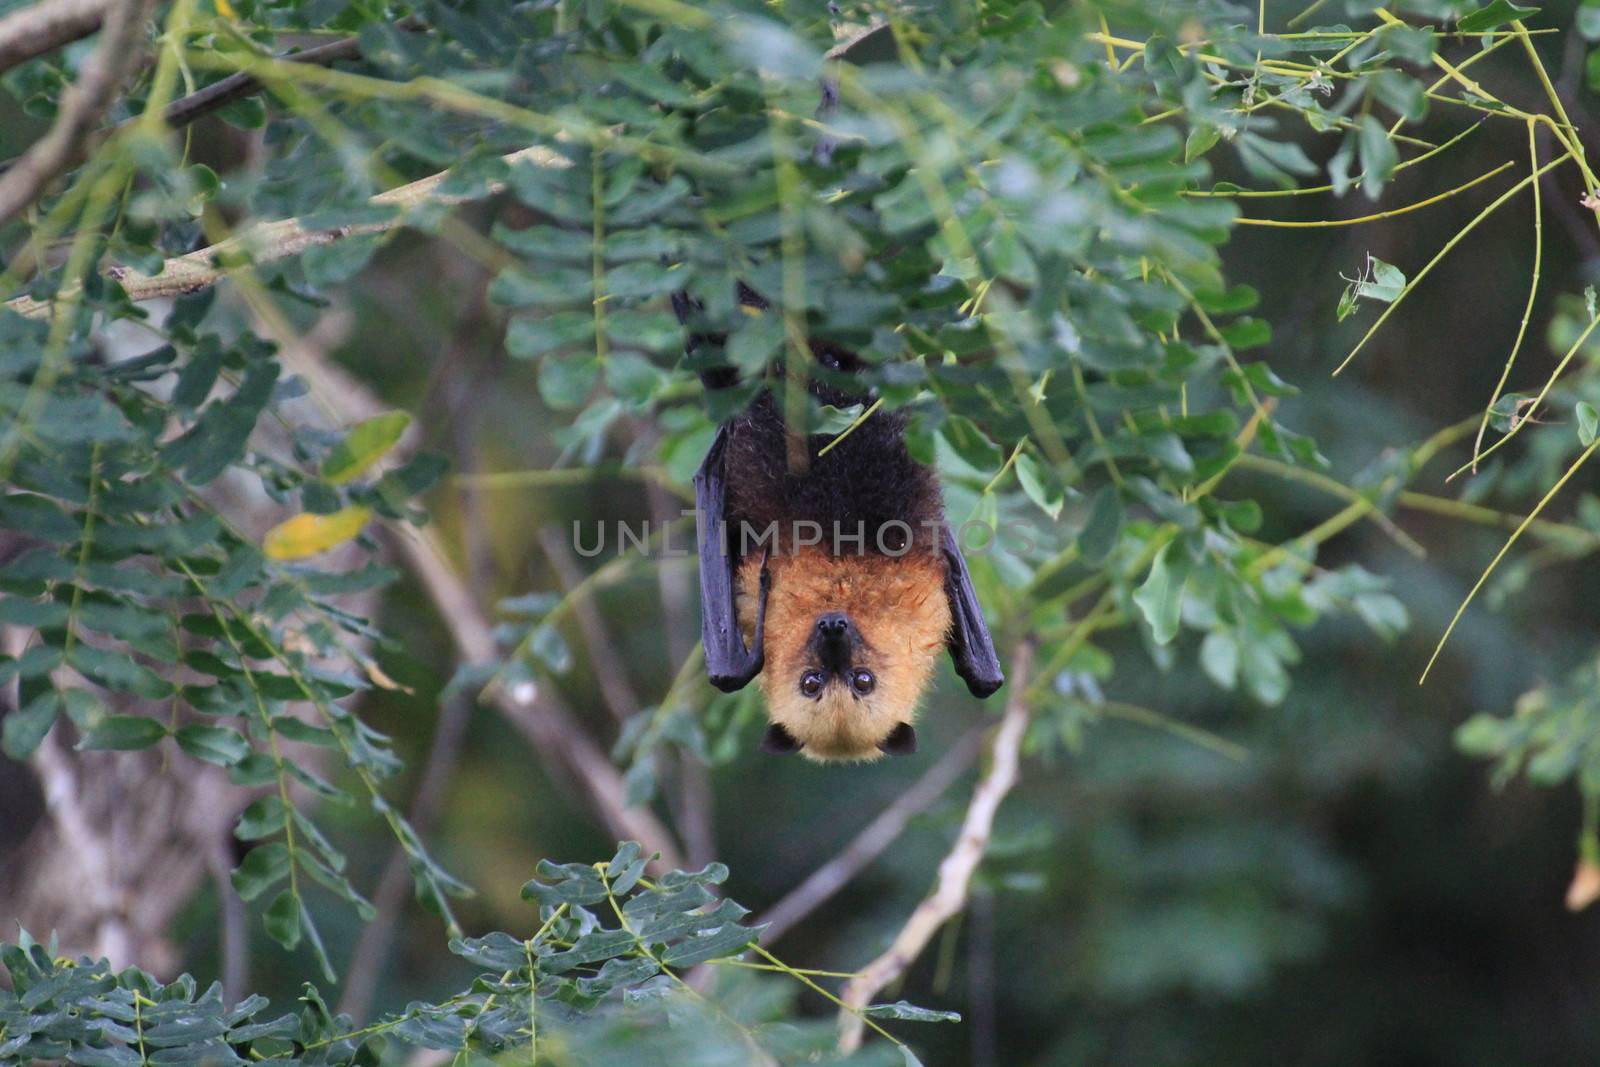 A fruit bat hanging in a tree